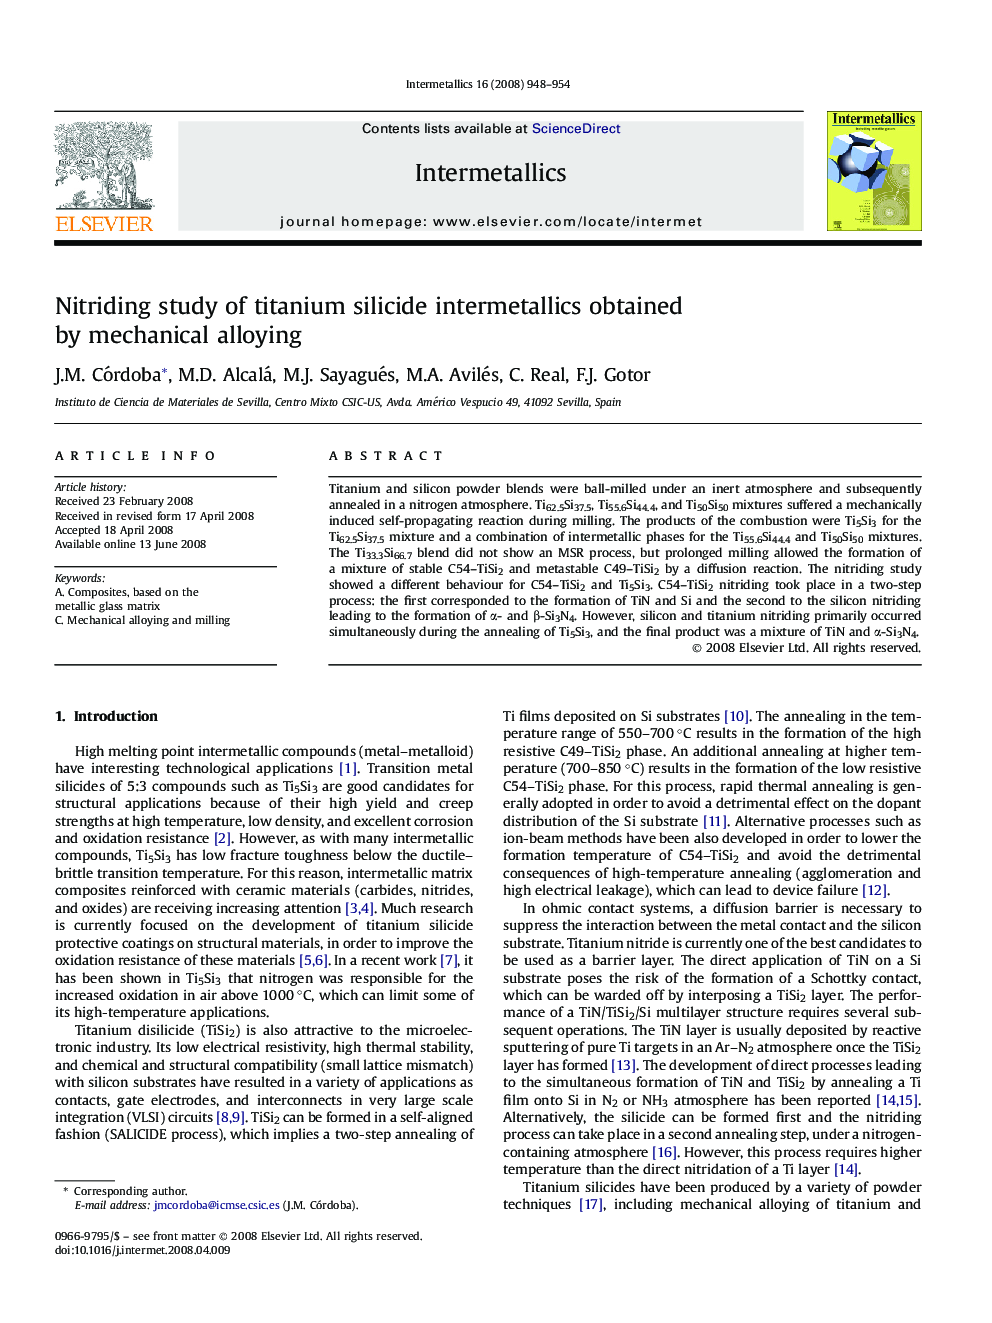 Nitriding study of titanium silicide intermetallics obtained by mechanical alloying